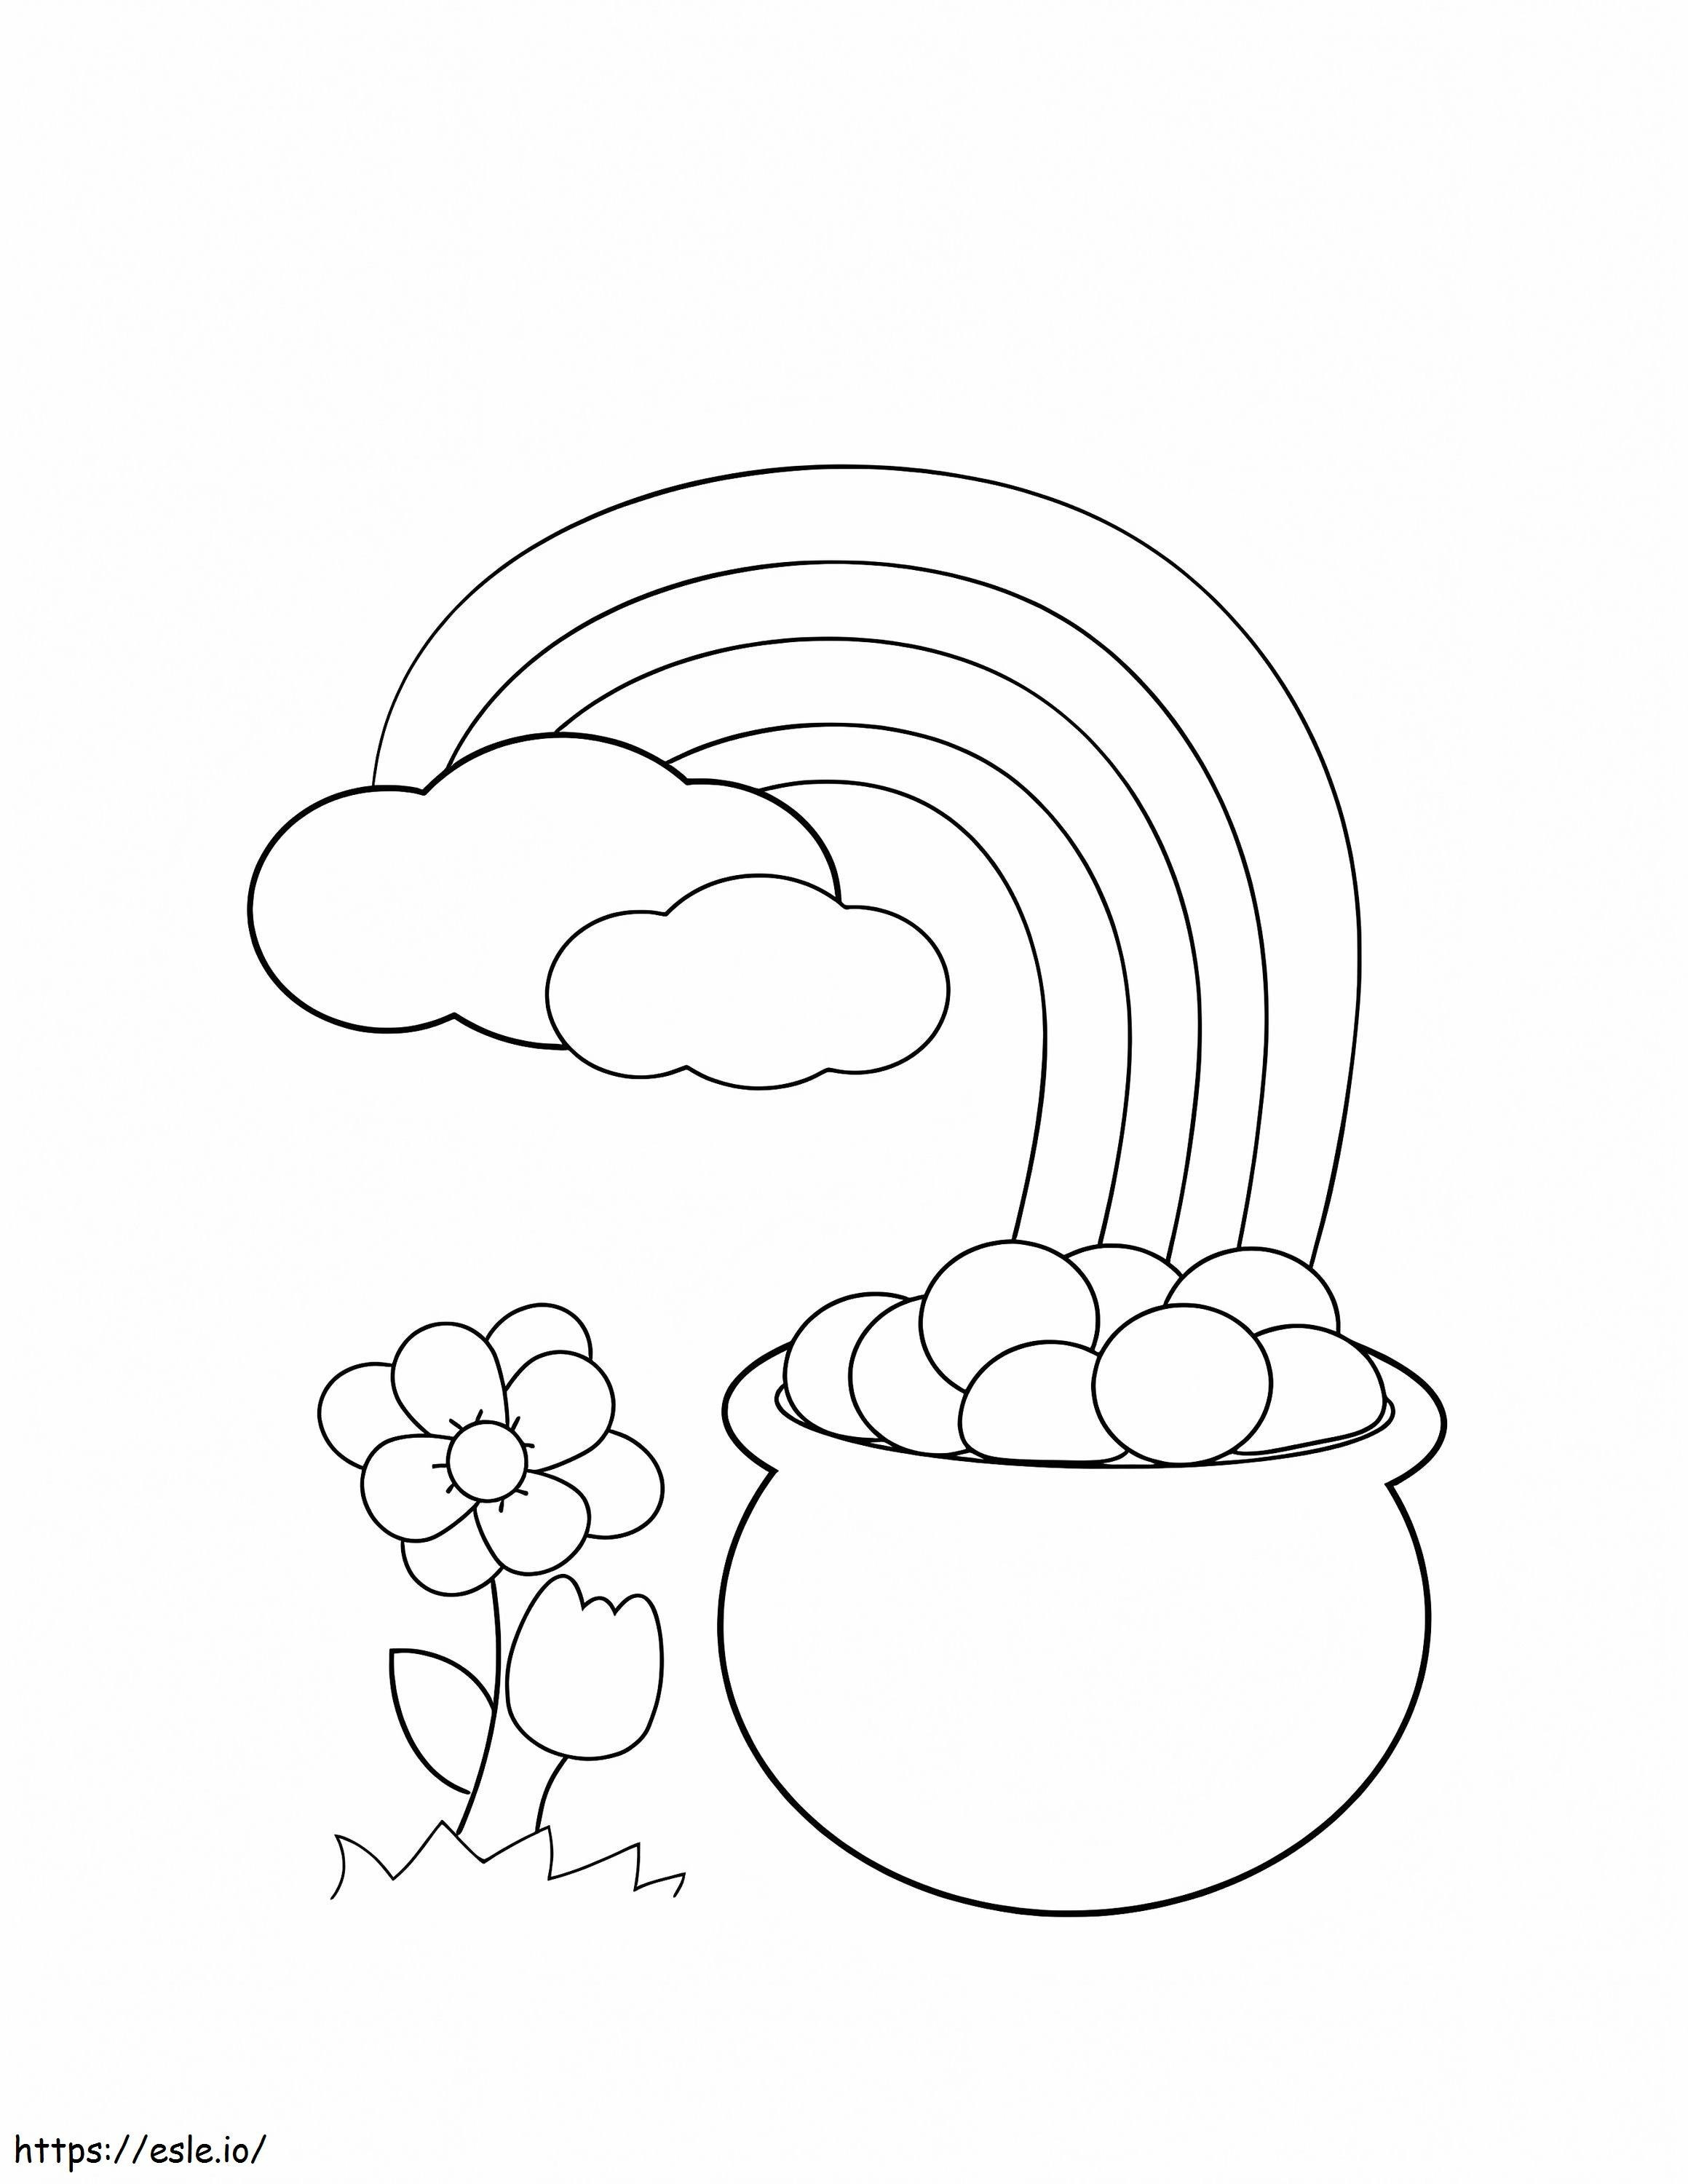 Pot Of Gold 4 coloring page